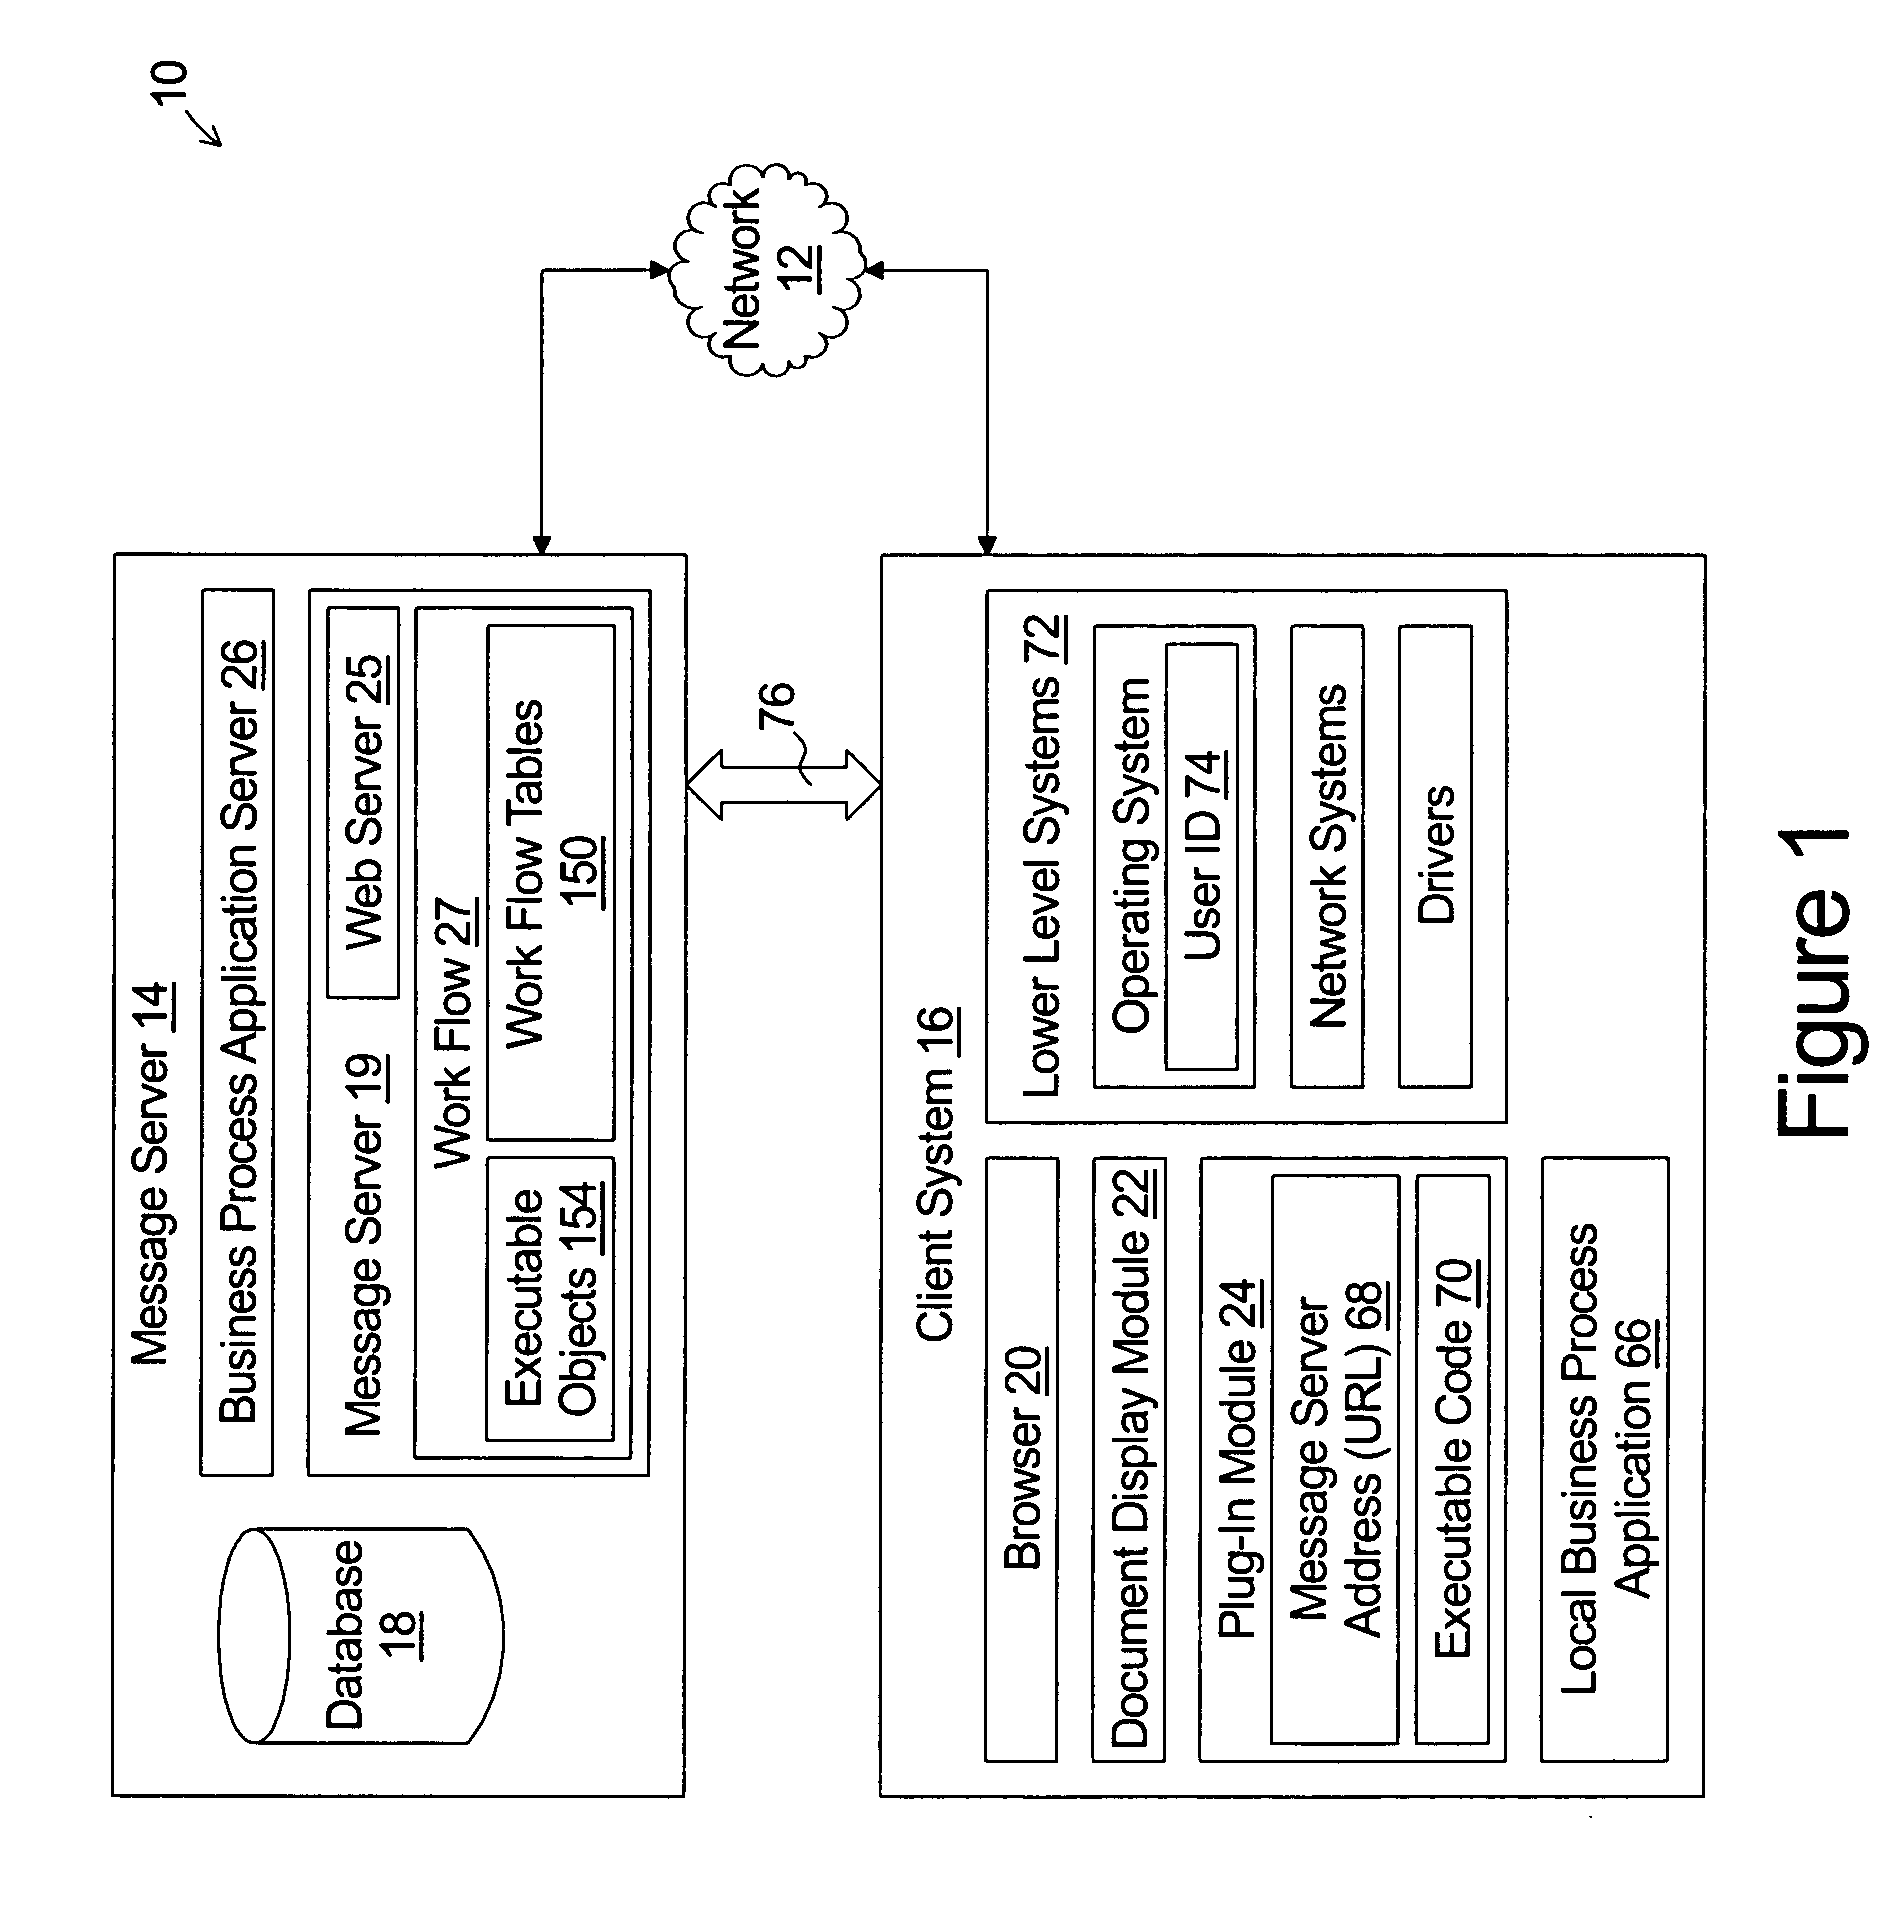 System and method for dynamically linking data within a portable document file with related data content stored in a database